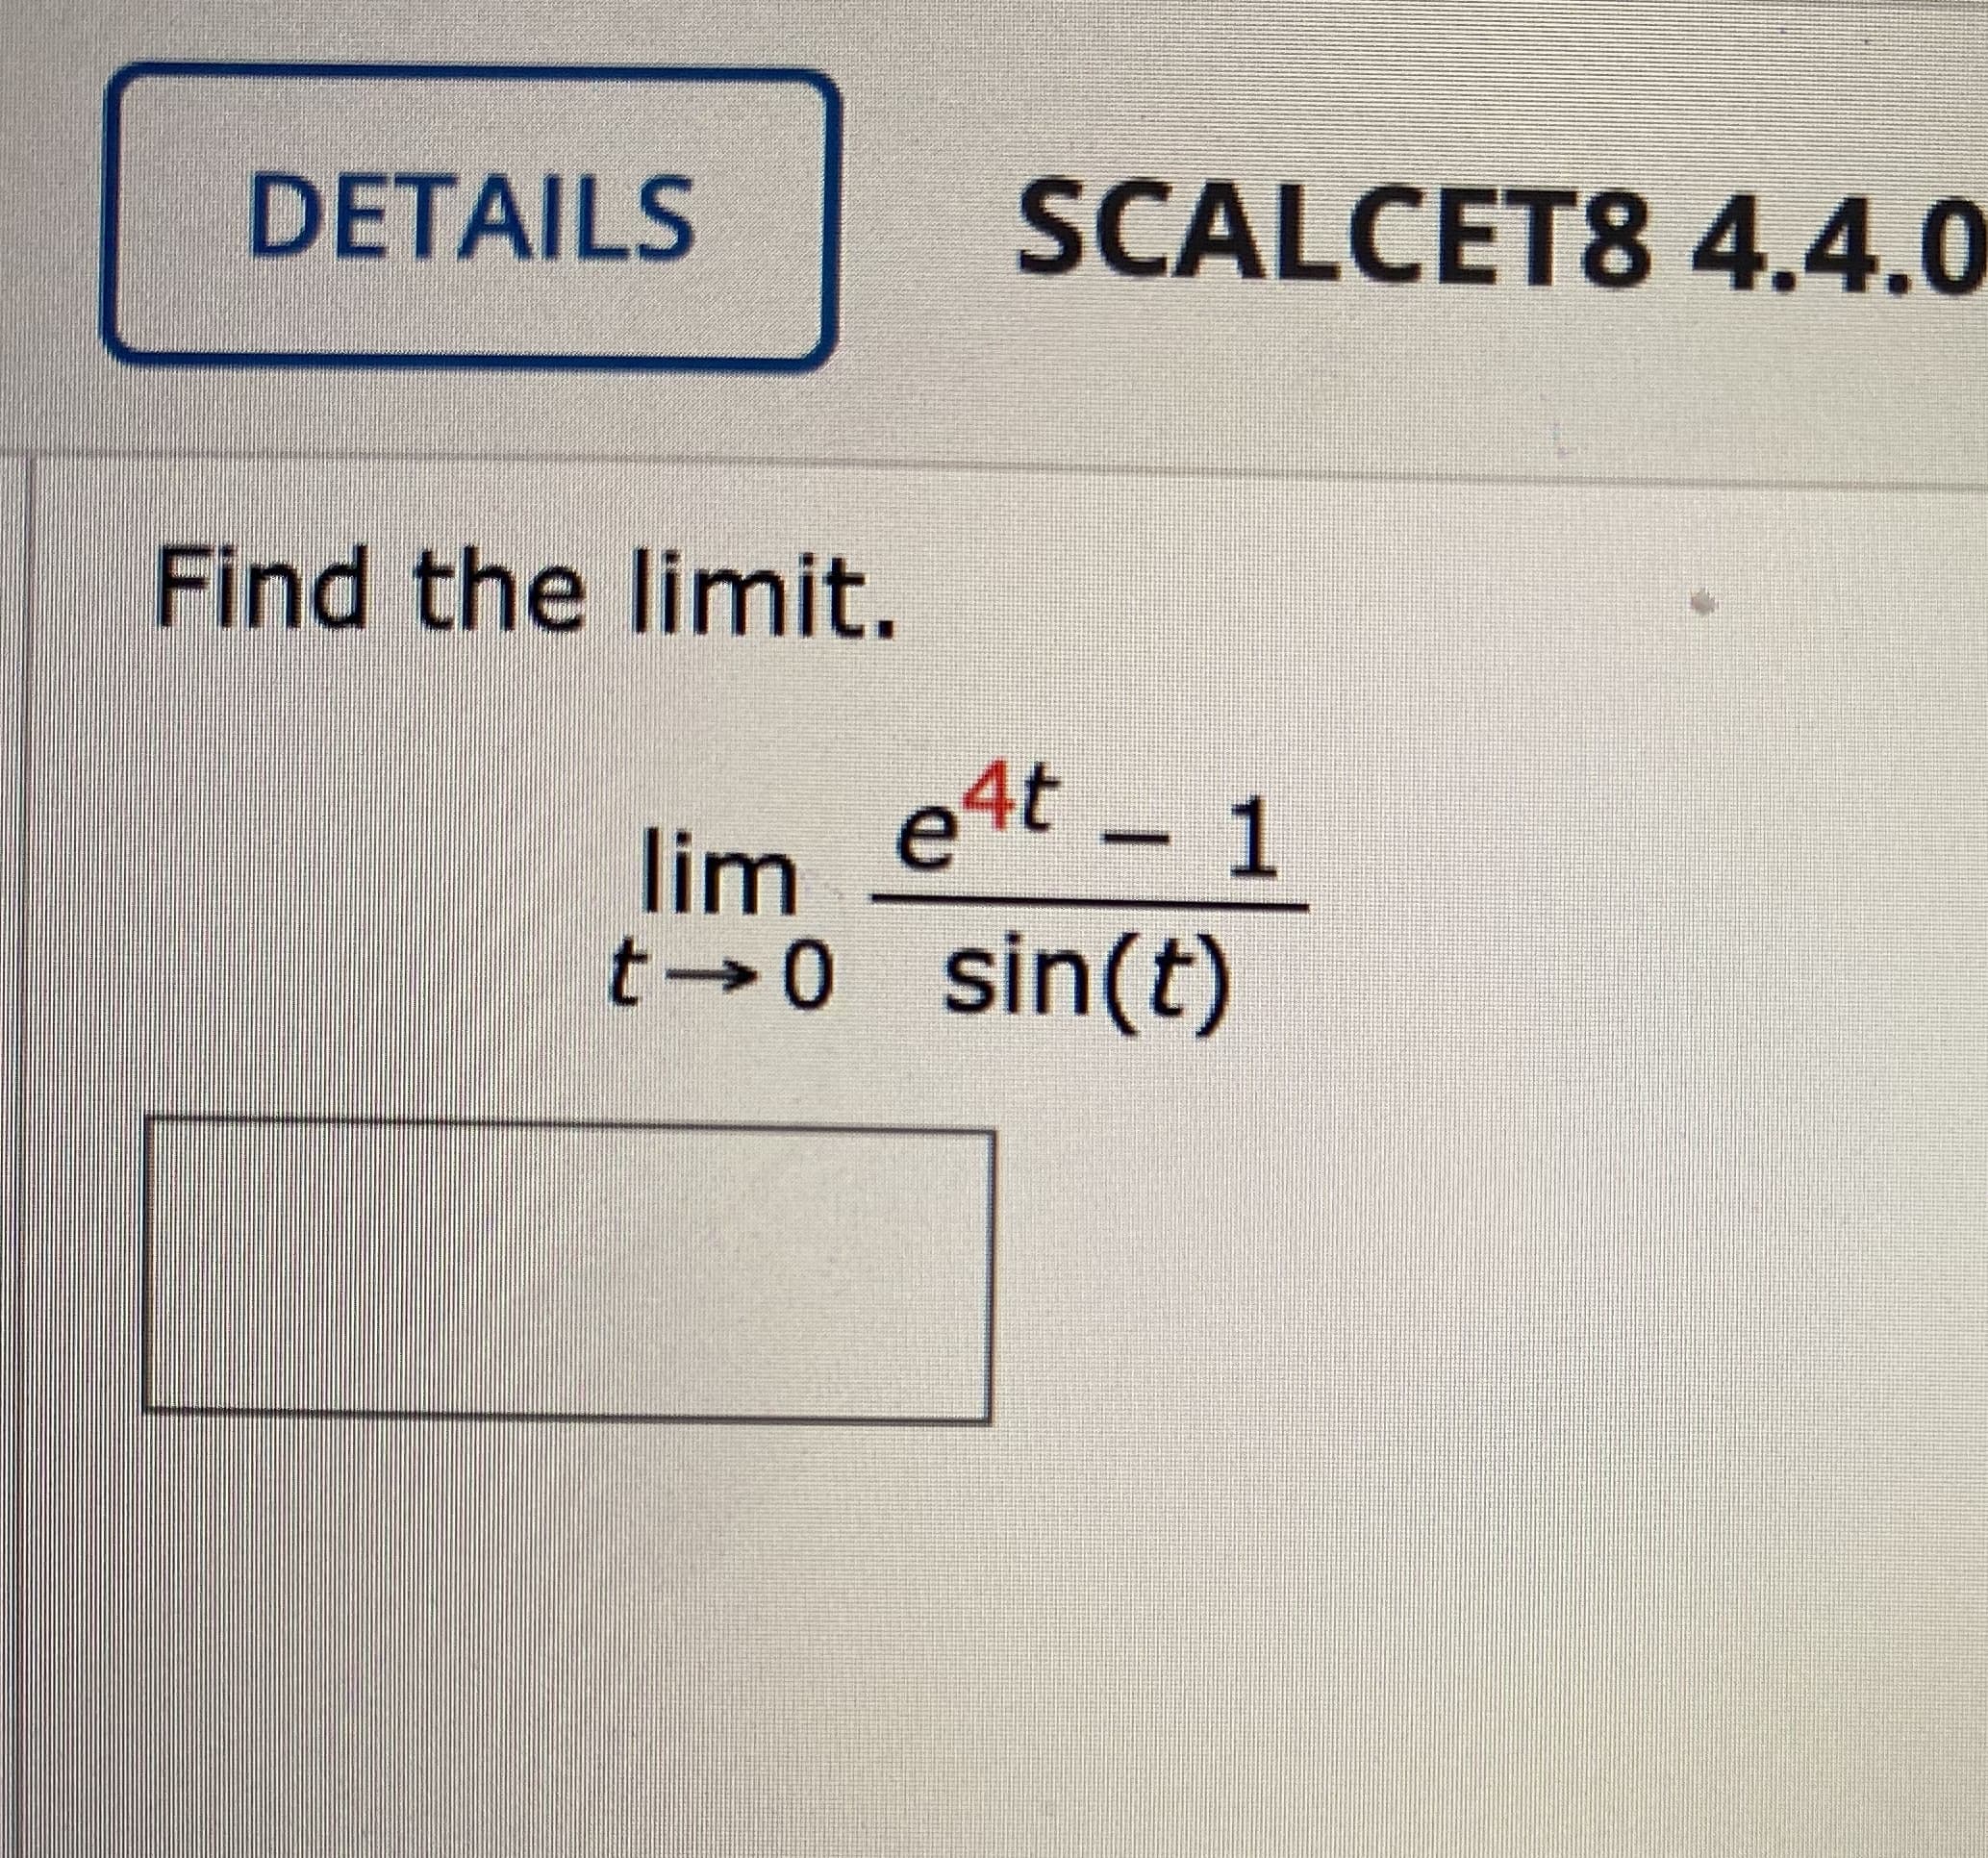 Find the limit.
e4t - 1
lim
t→0 sin(t)
